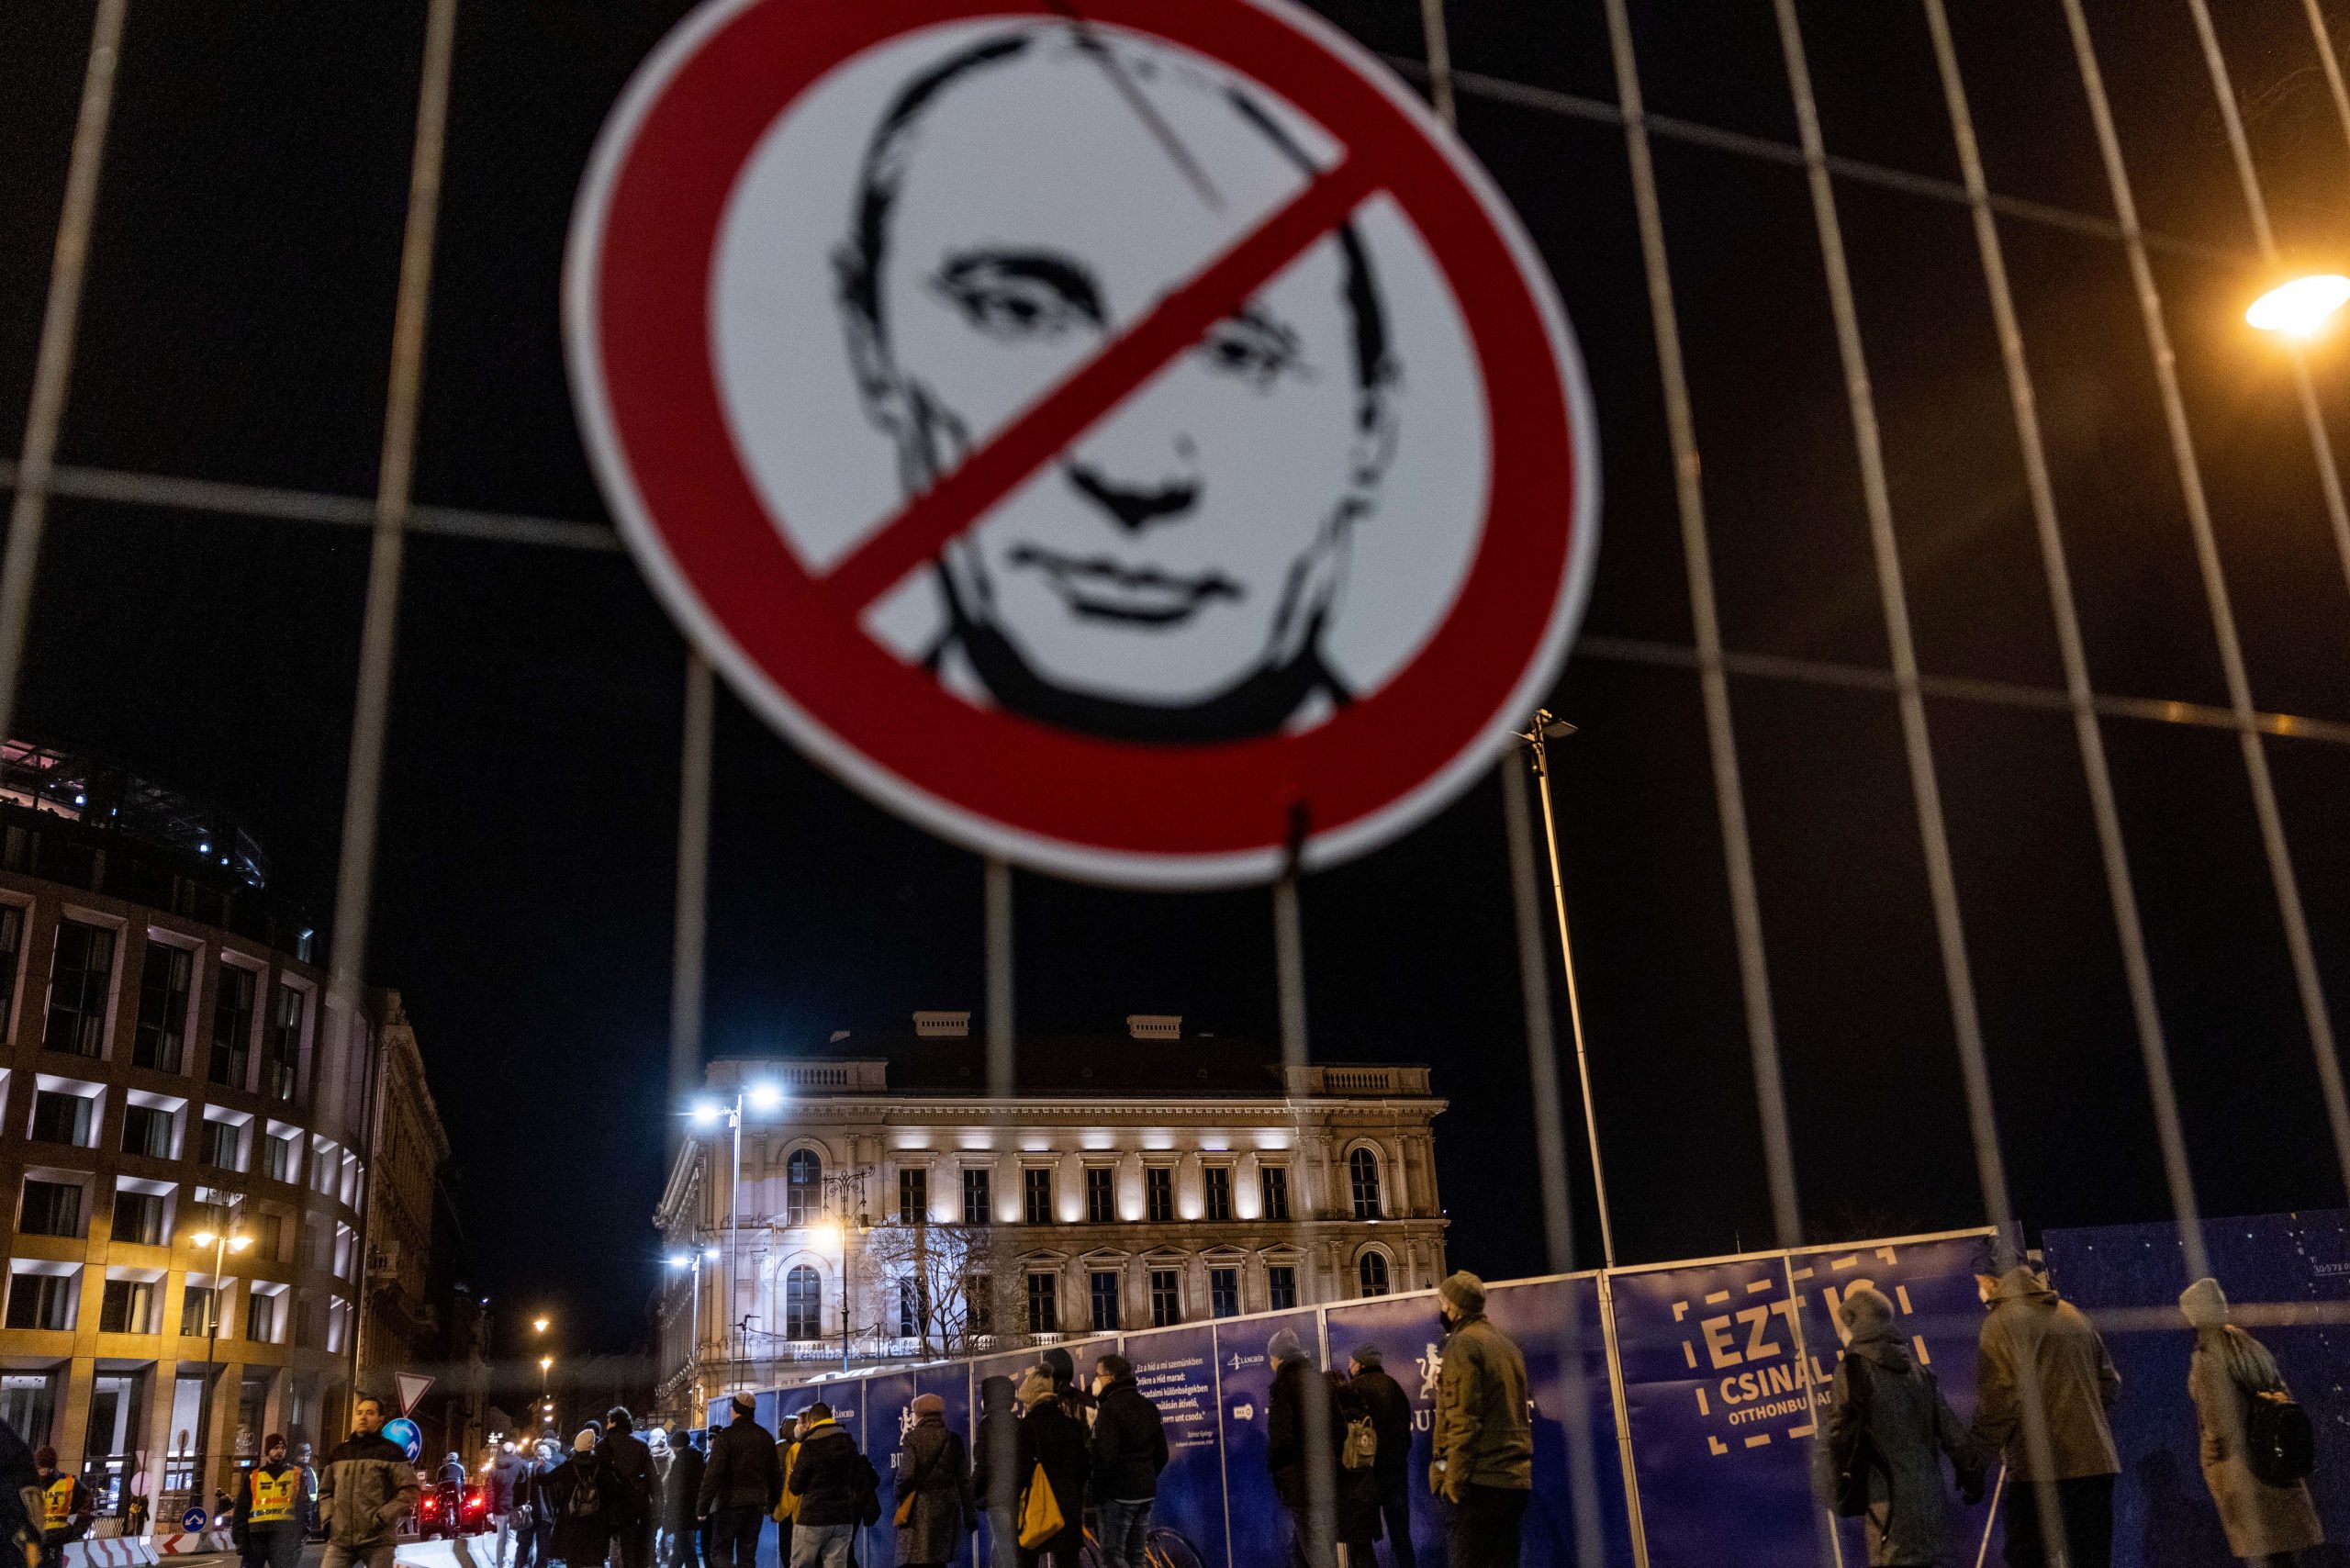 Anti-Putin placard outside the Russian owned international investment bank during a demonstration against Russia's President Putin and the Russian-owned bank on March 1, 2022, in Budapest, Hungary. On February 24, 2022.